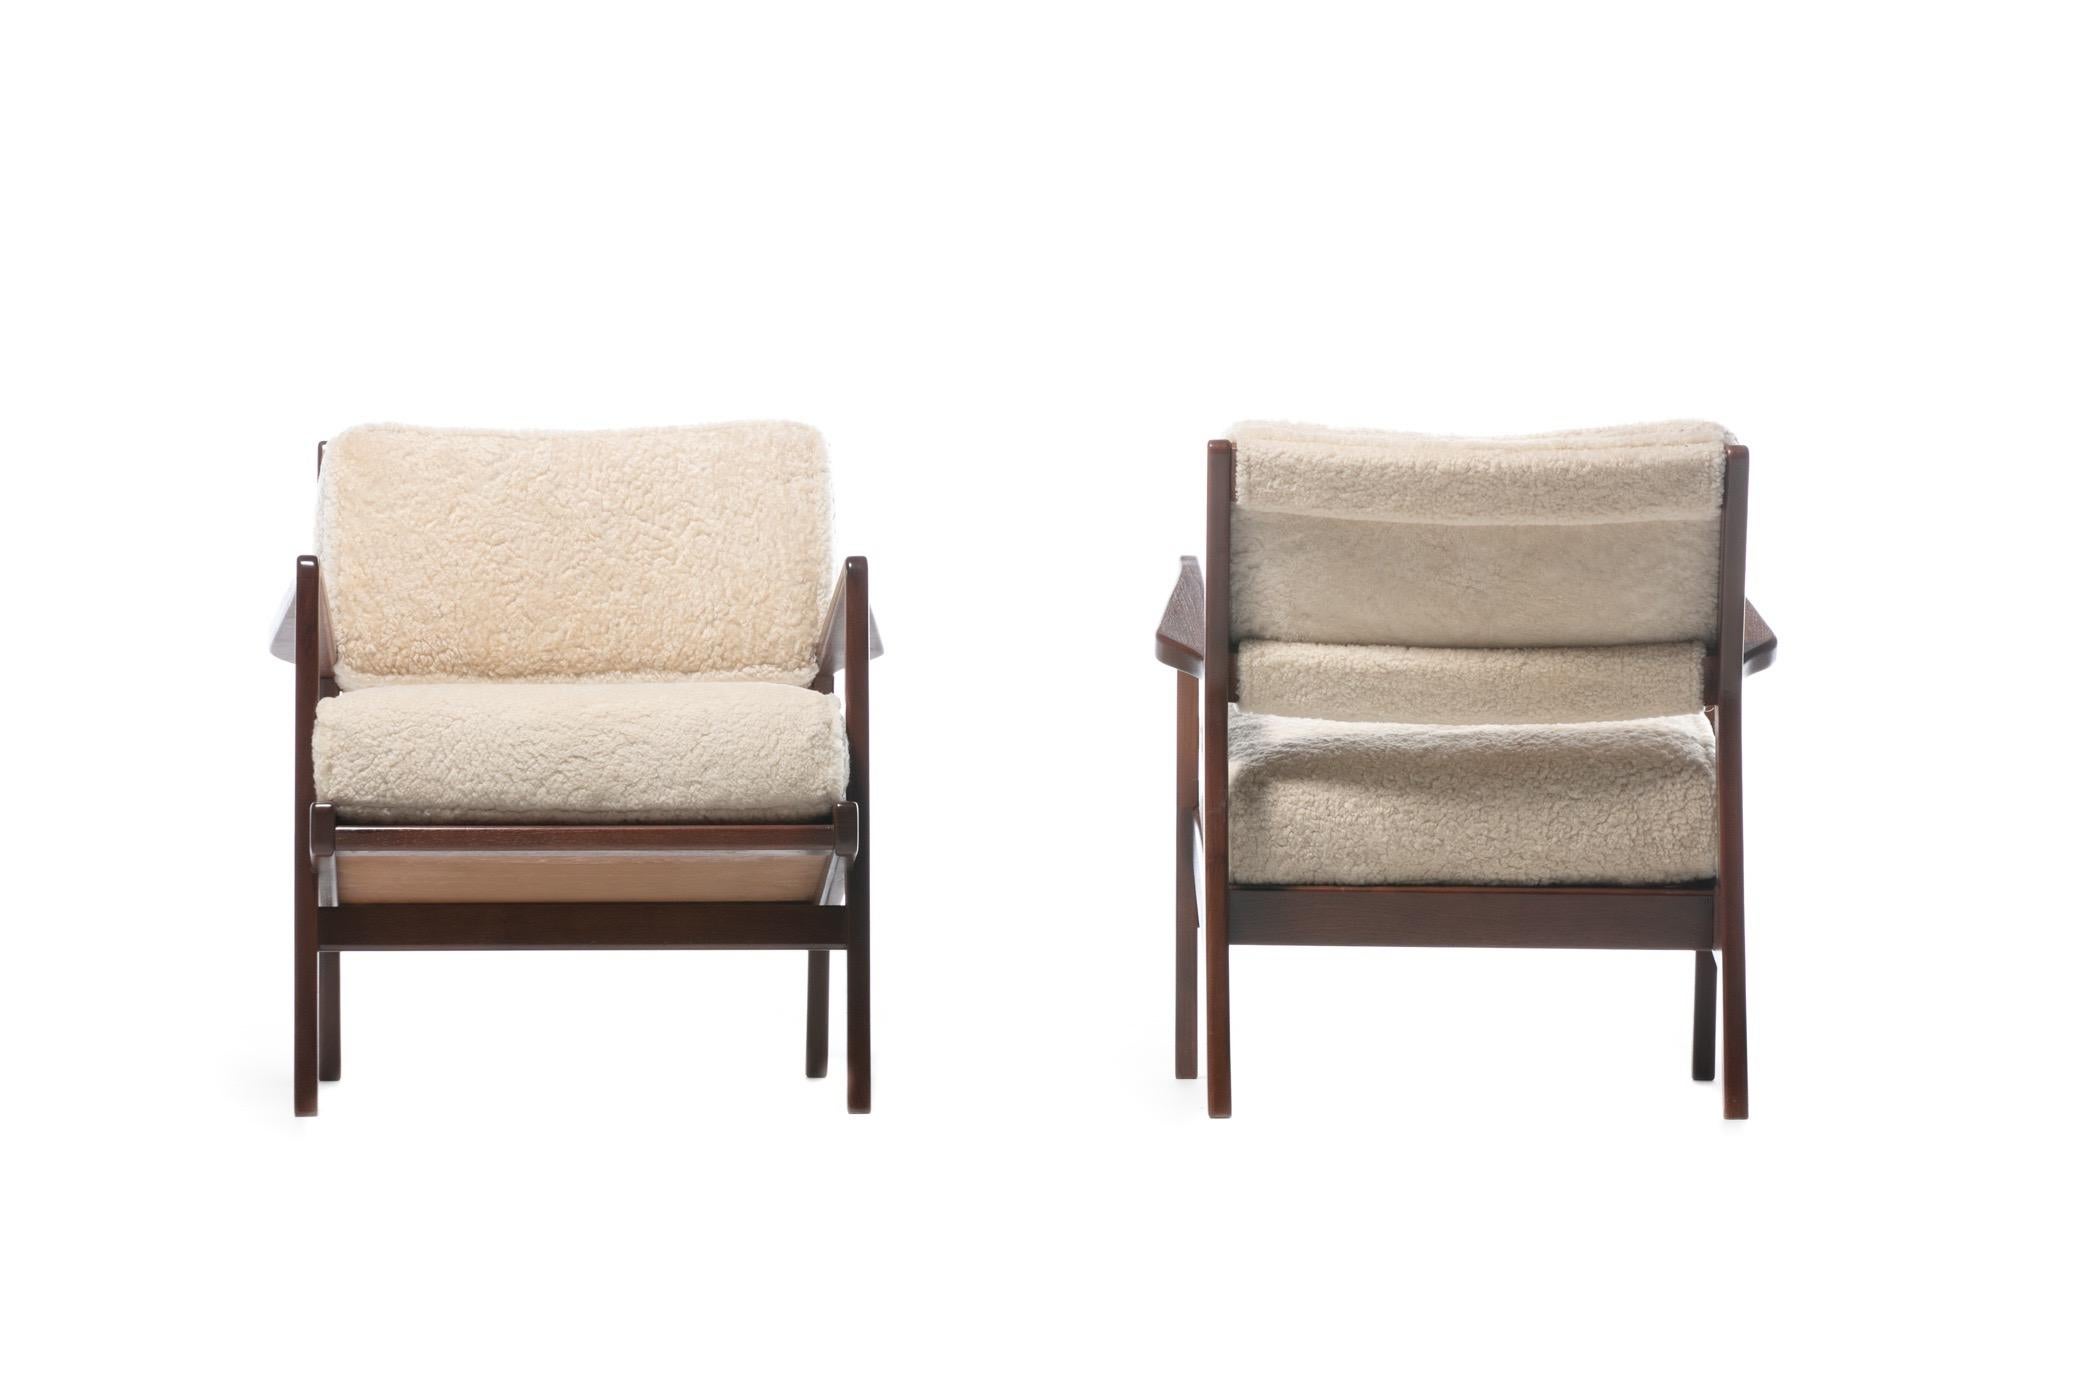 Jens Risom Walnut Lounge Chairs in Ivory Shearling, circa 1950s In Good Condition For Sale In Saint Louis, MO